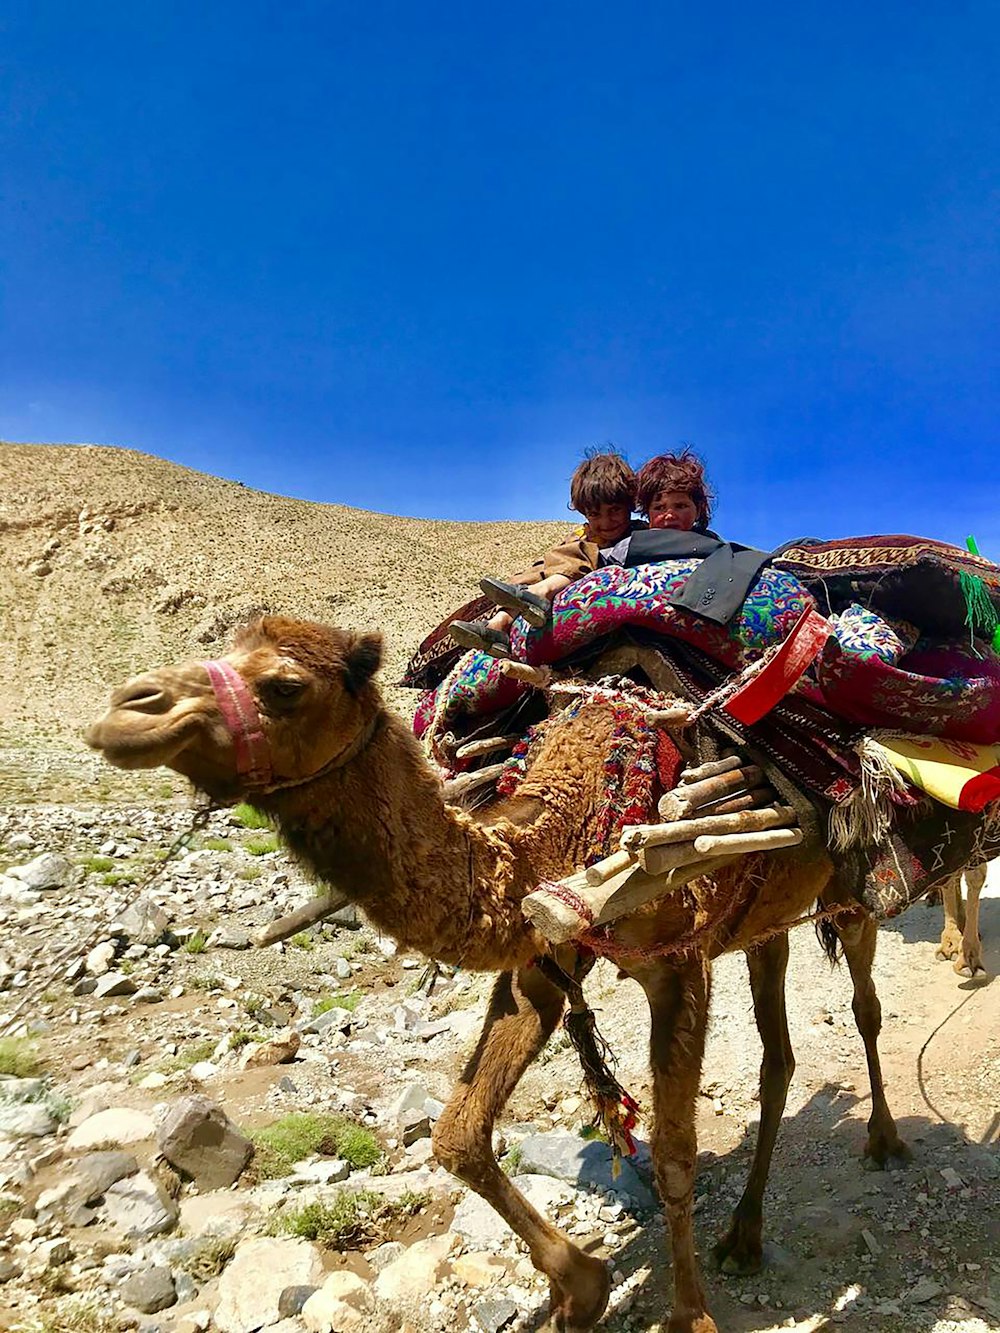 a couple people riding camels